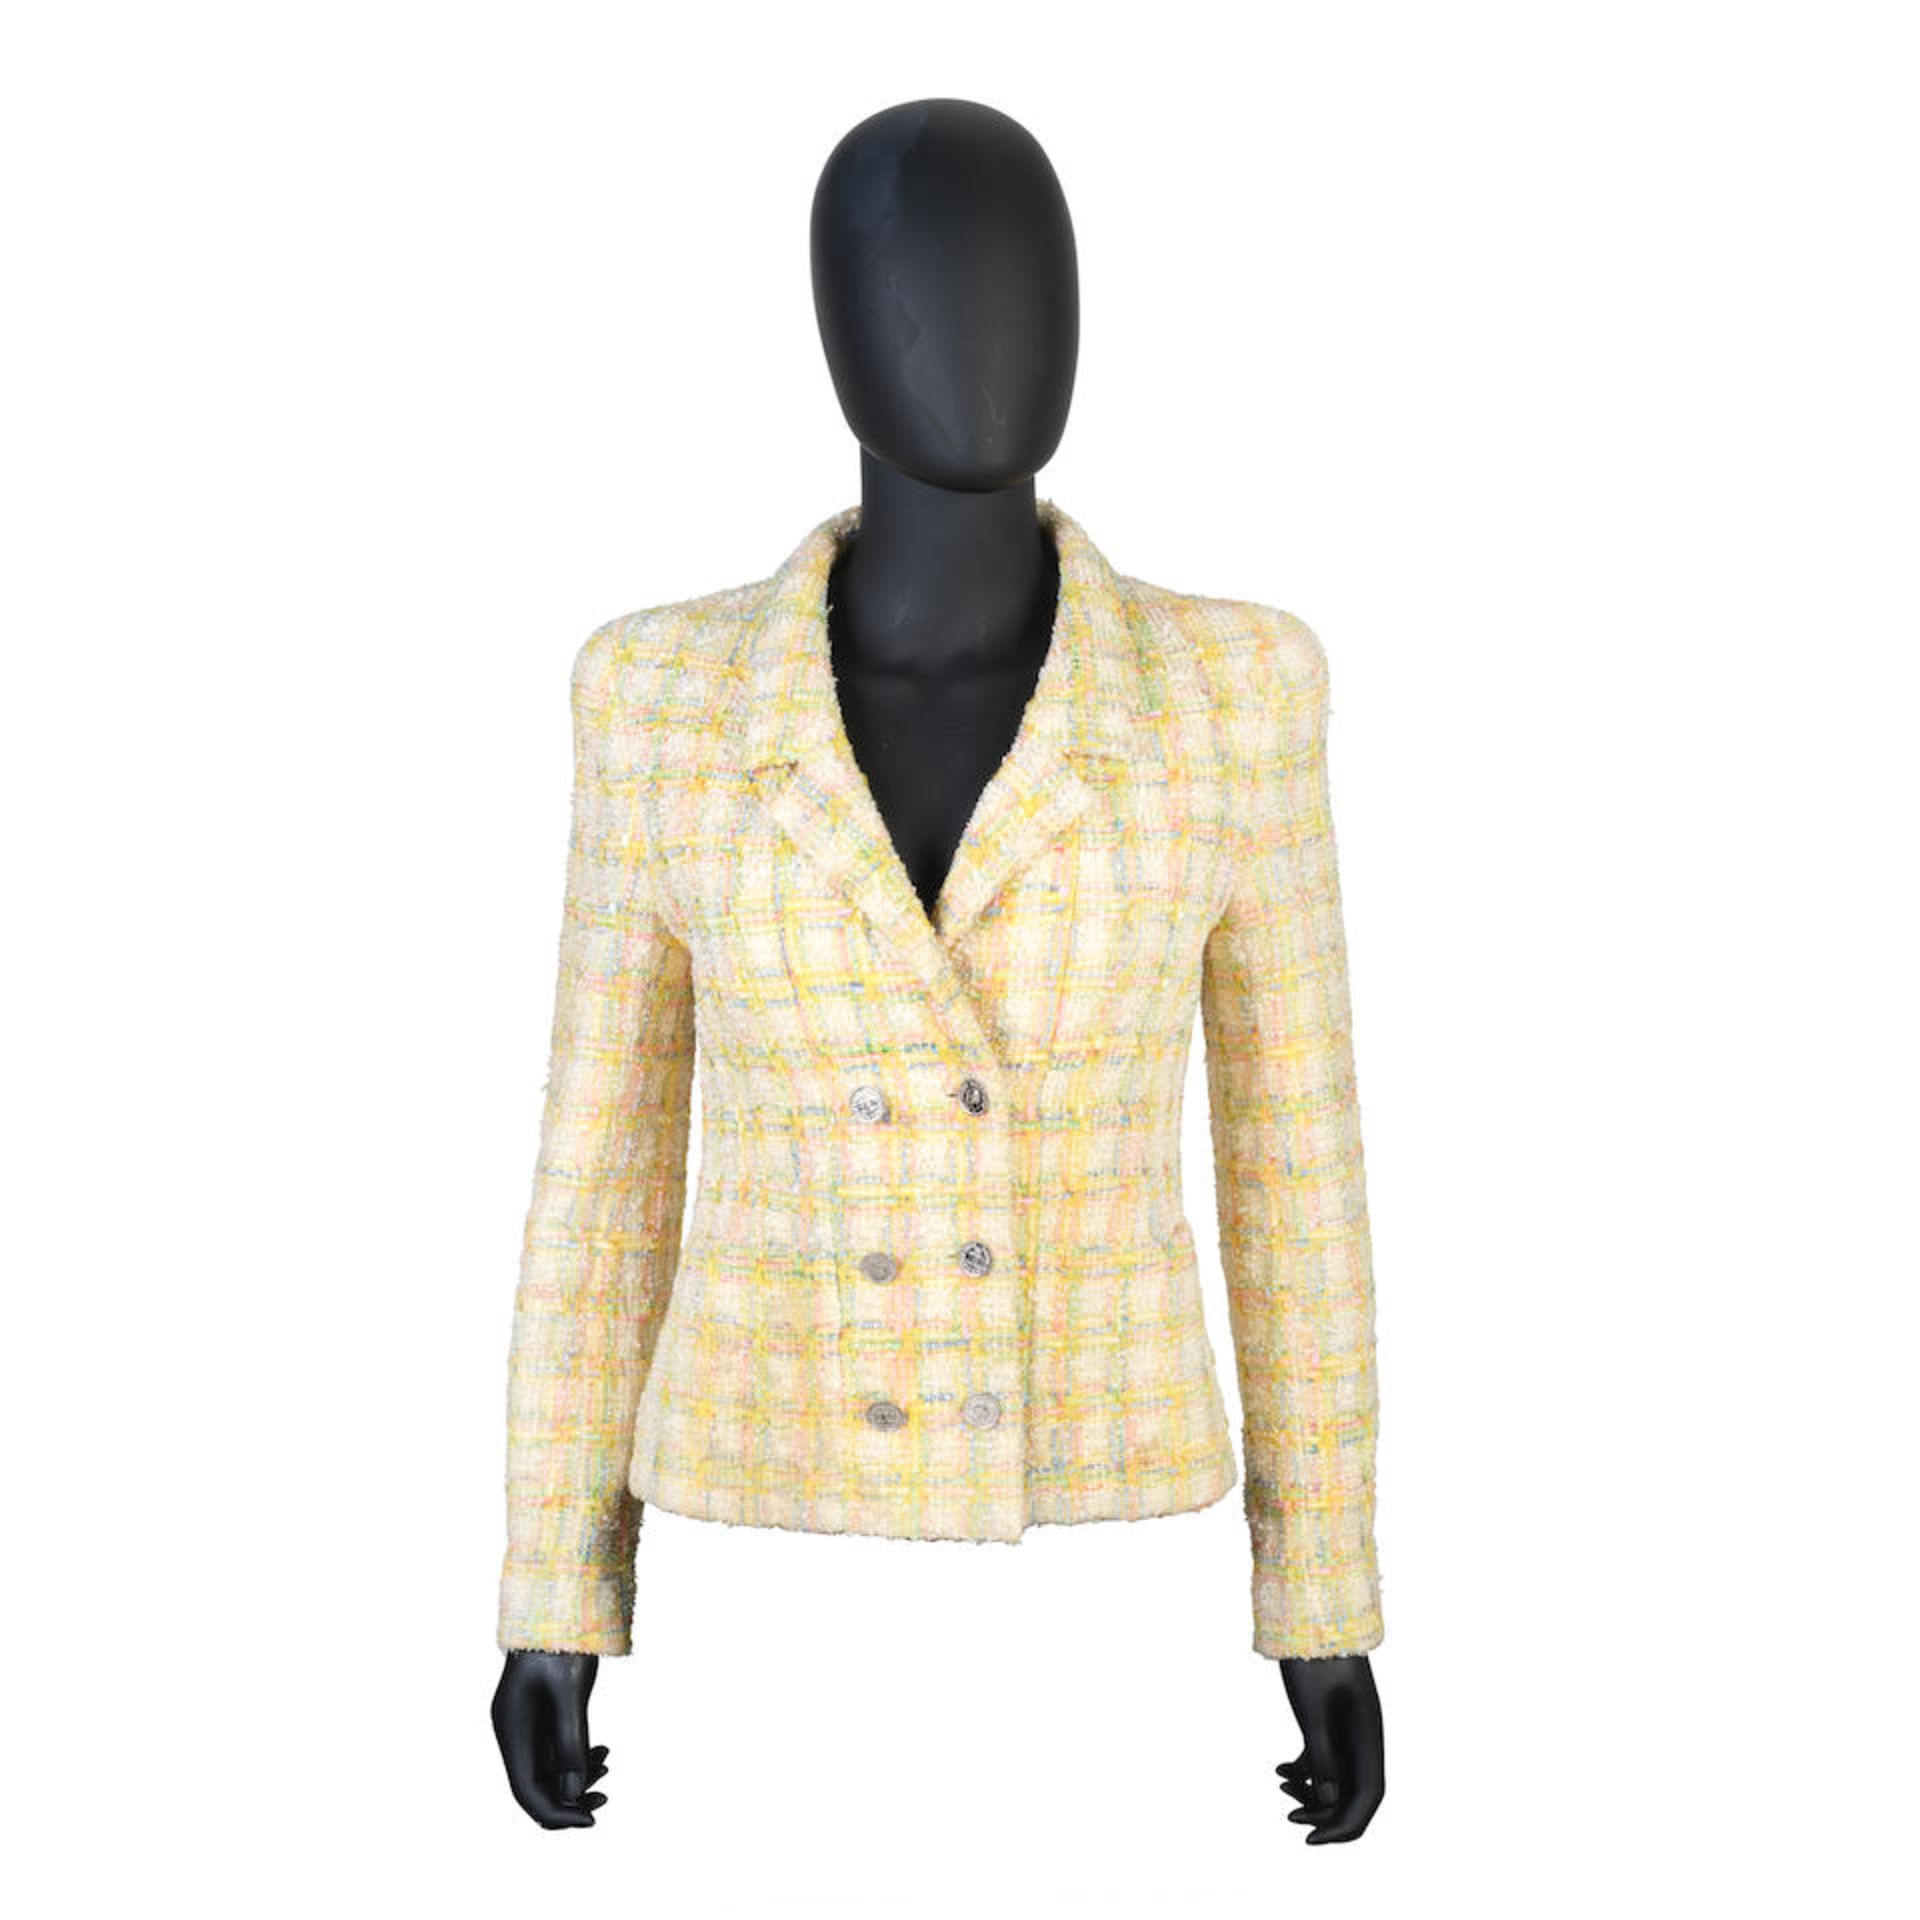 Karl Lagerfeld for Chanel: a Yellow, Green and Pink Tweed Jacket Spring 1996